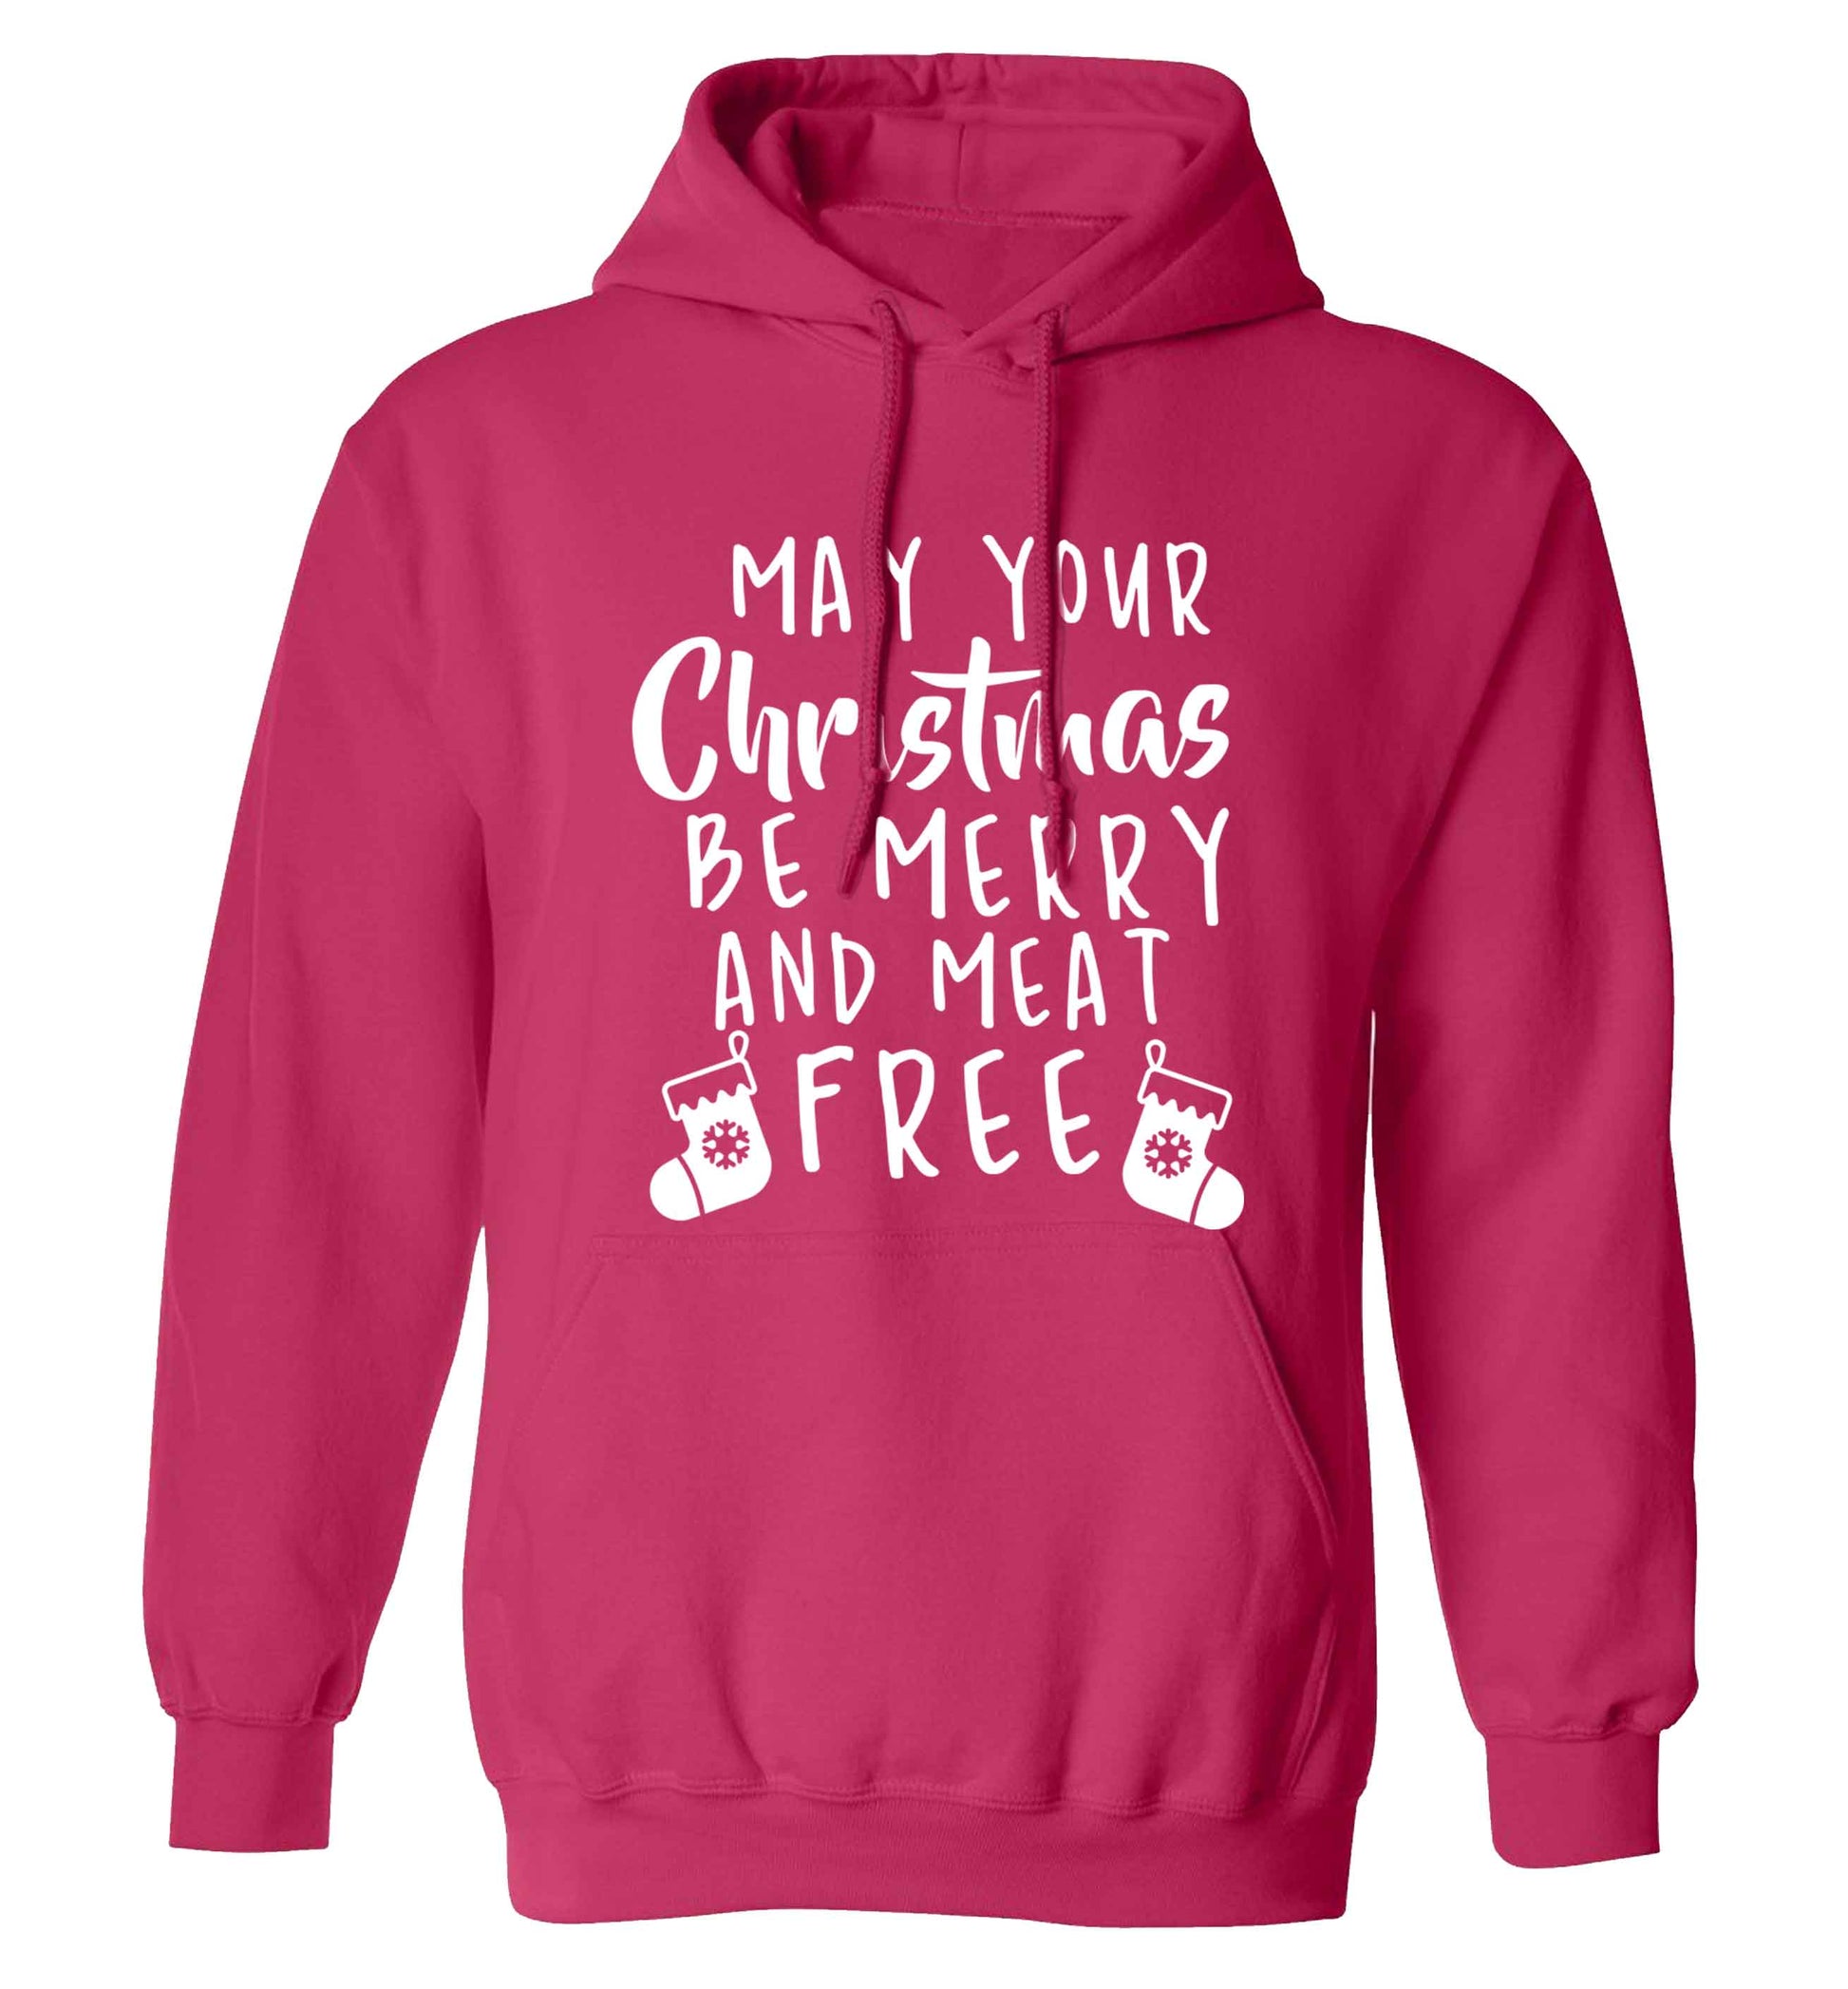 May your Christmas be merry and meat free adults unisex pink hoodie 2XL